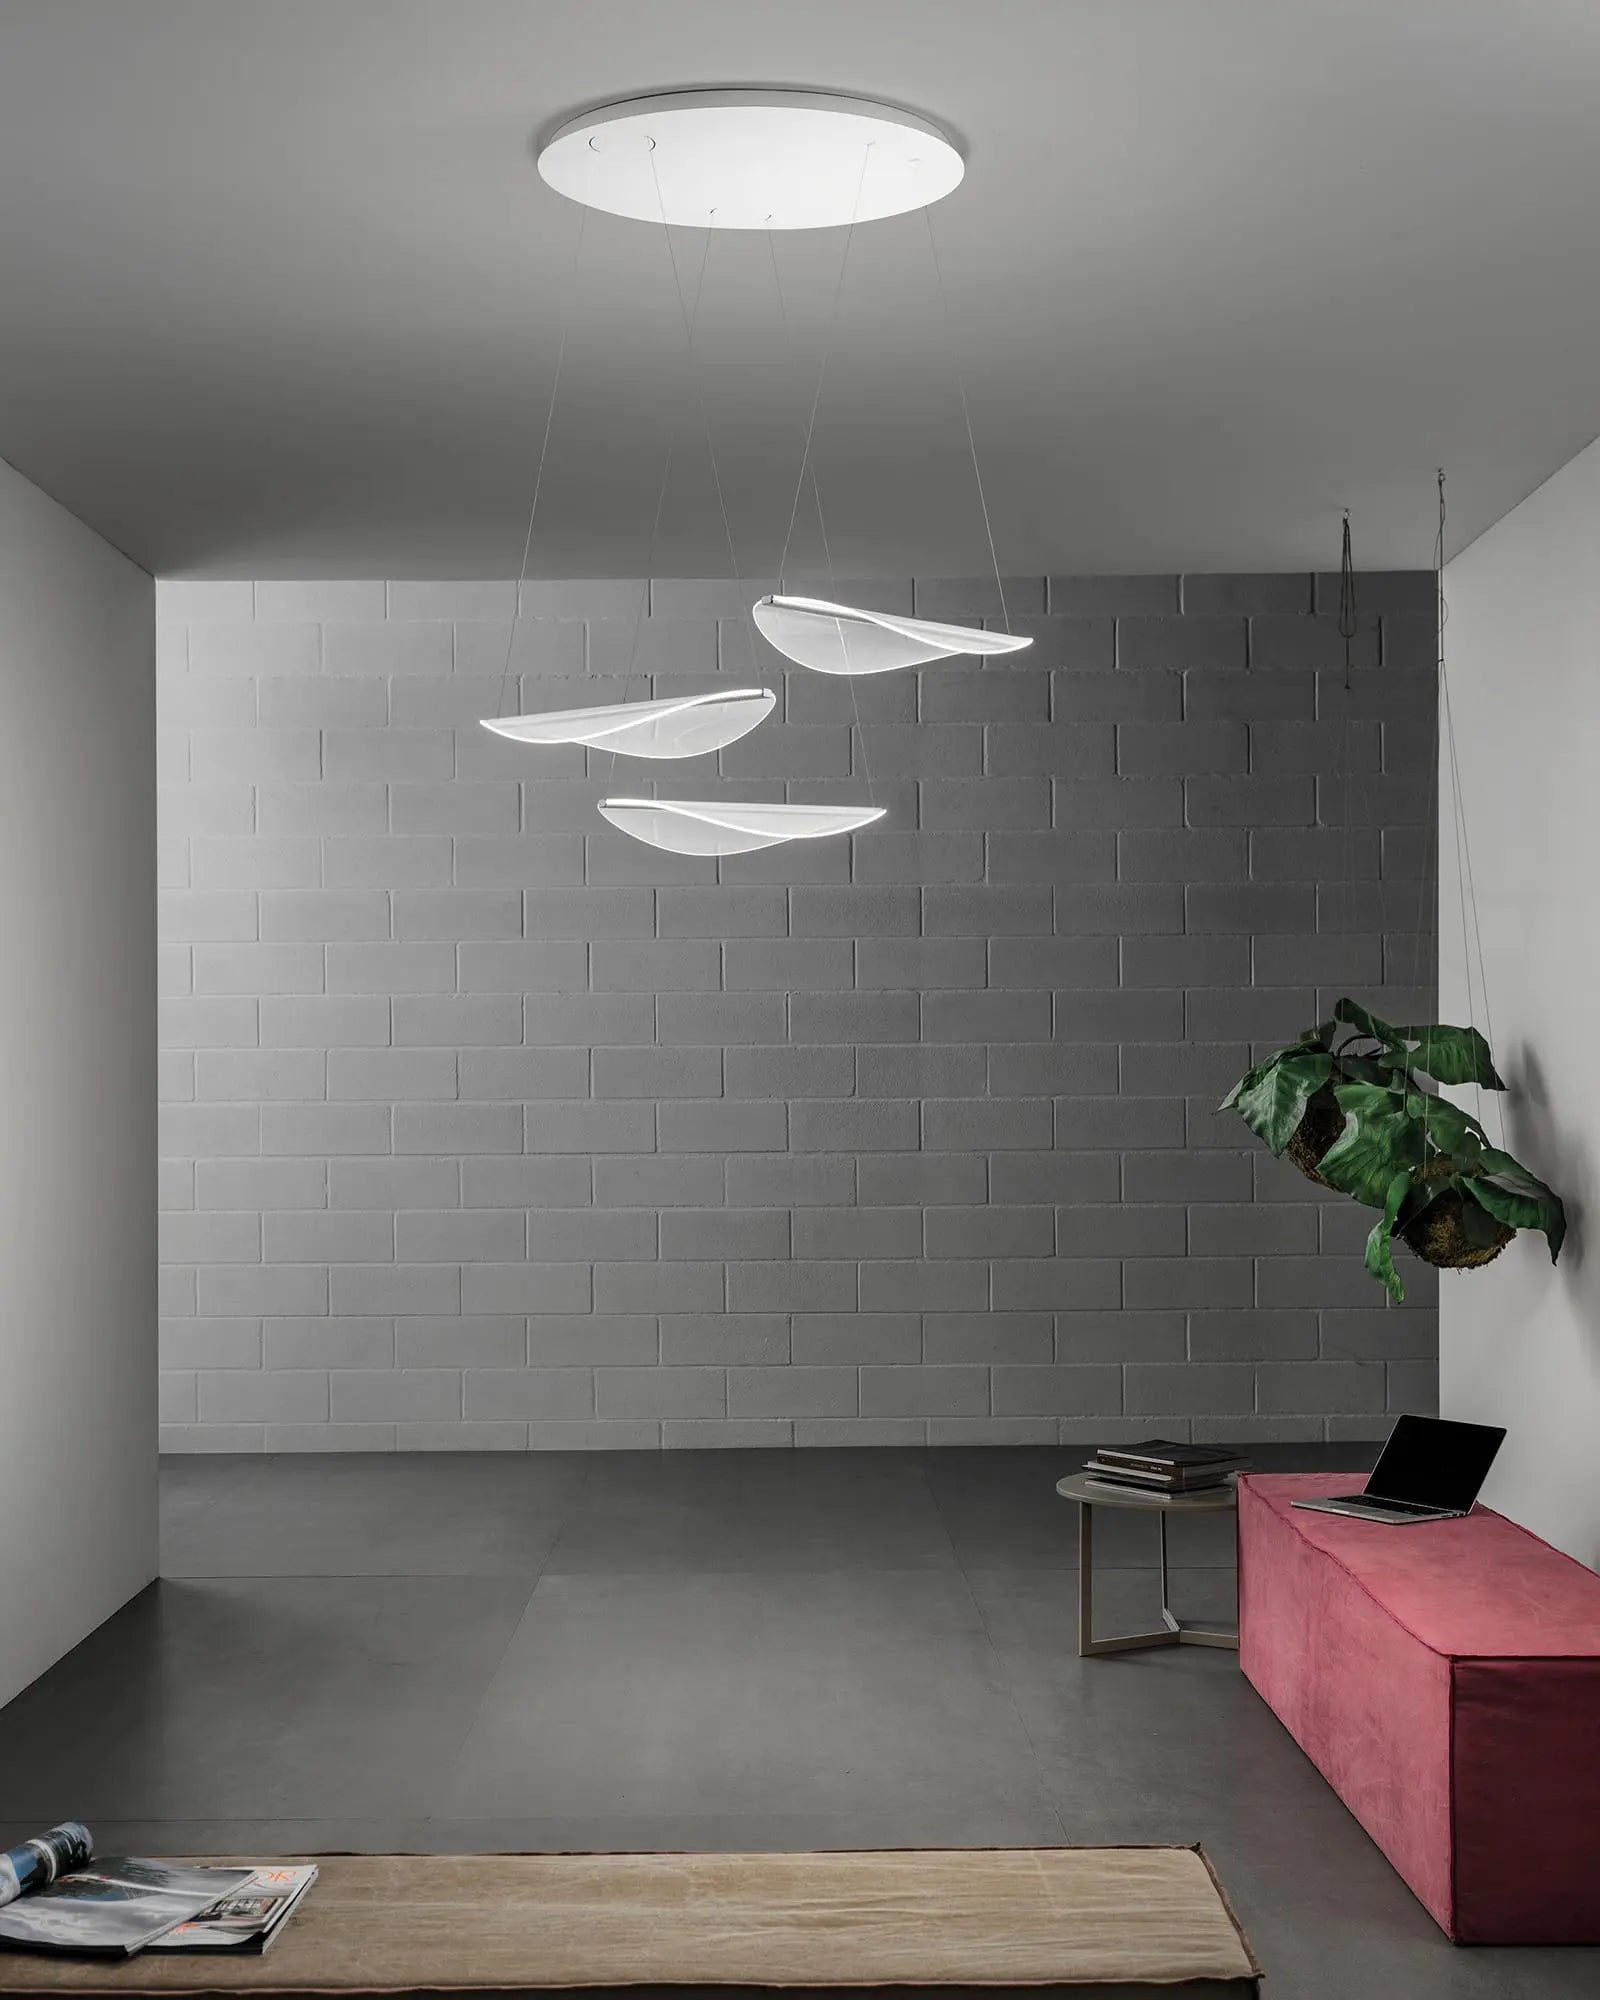 Diphy pendant light above a lounge area